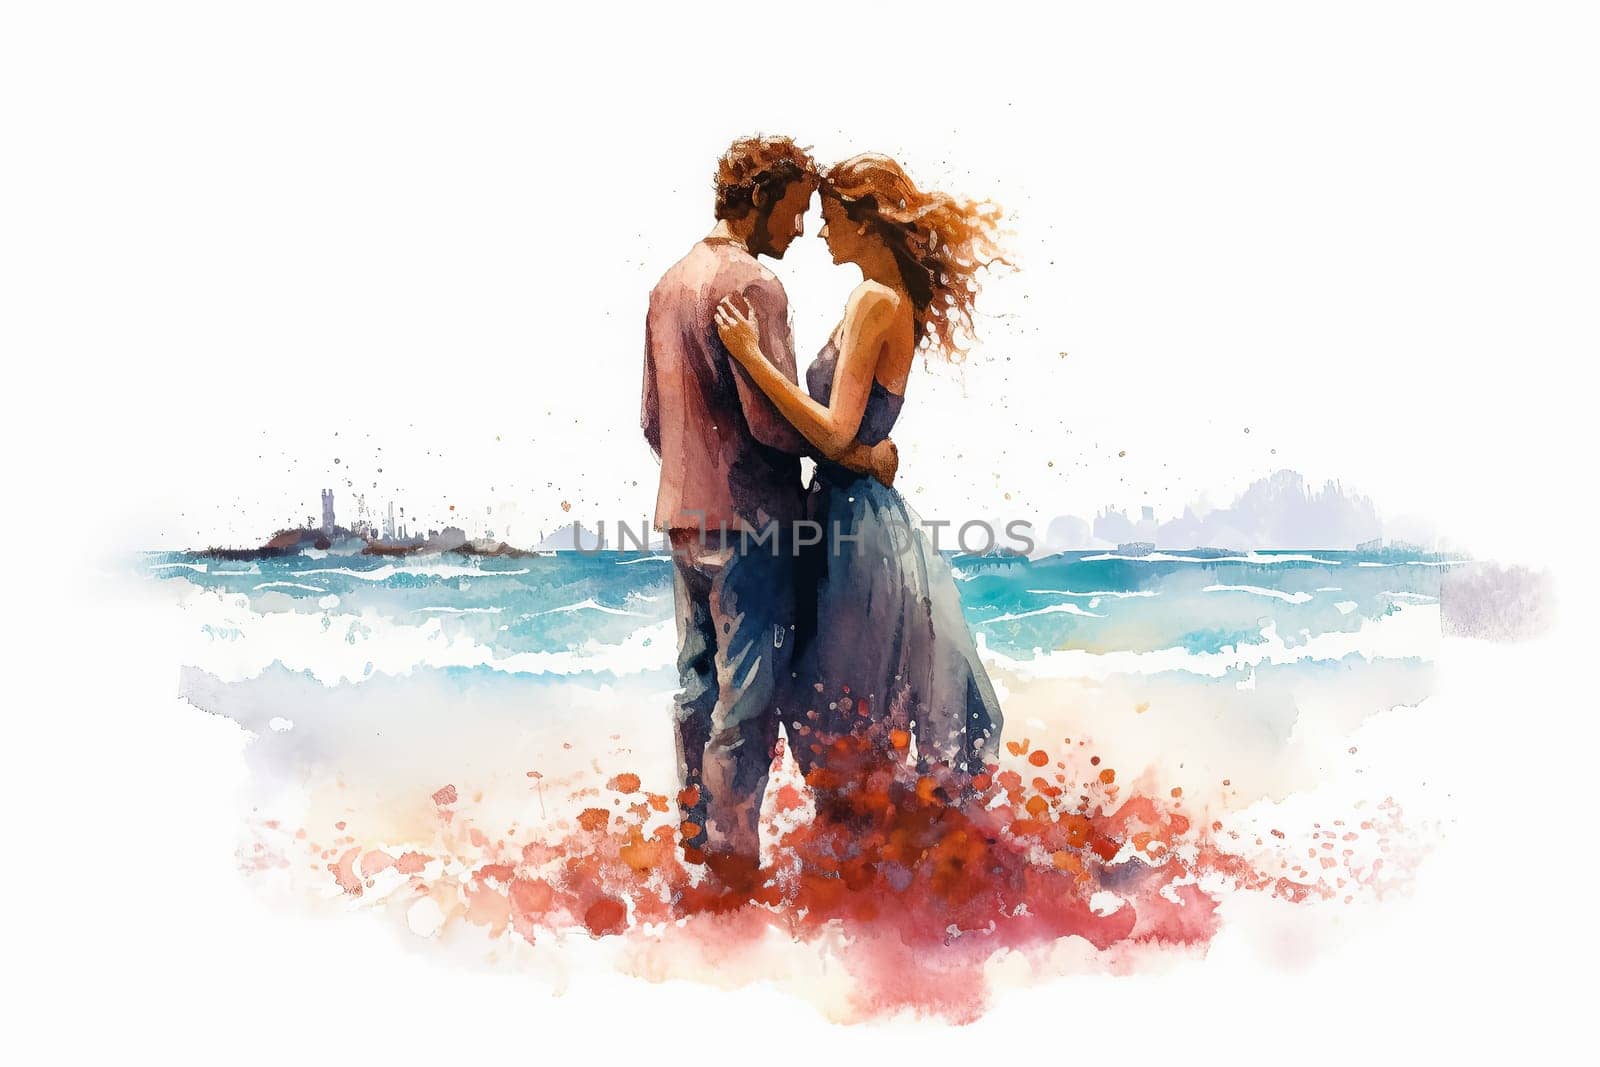 a watercolor illustration portraying a couple in love against the backdrop of the ocean. by Alla_Morozova93